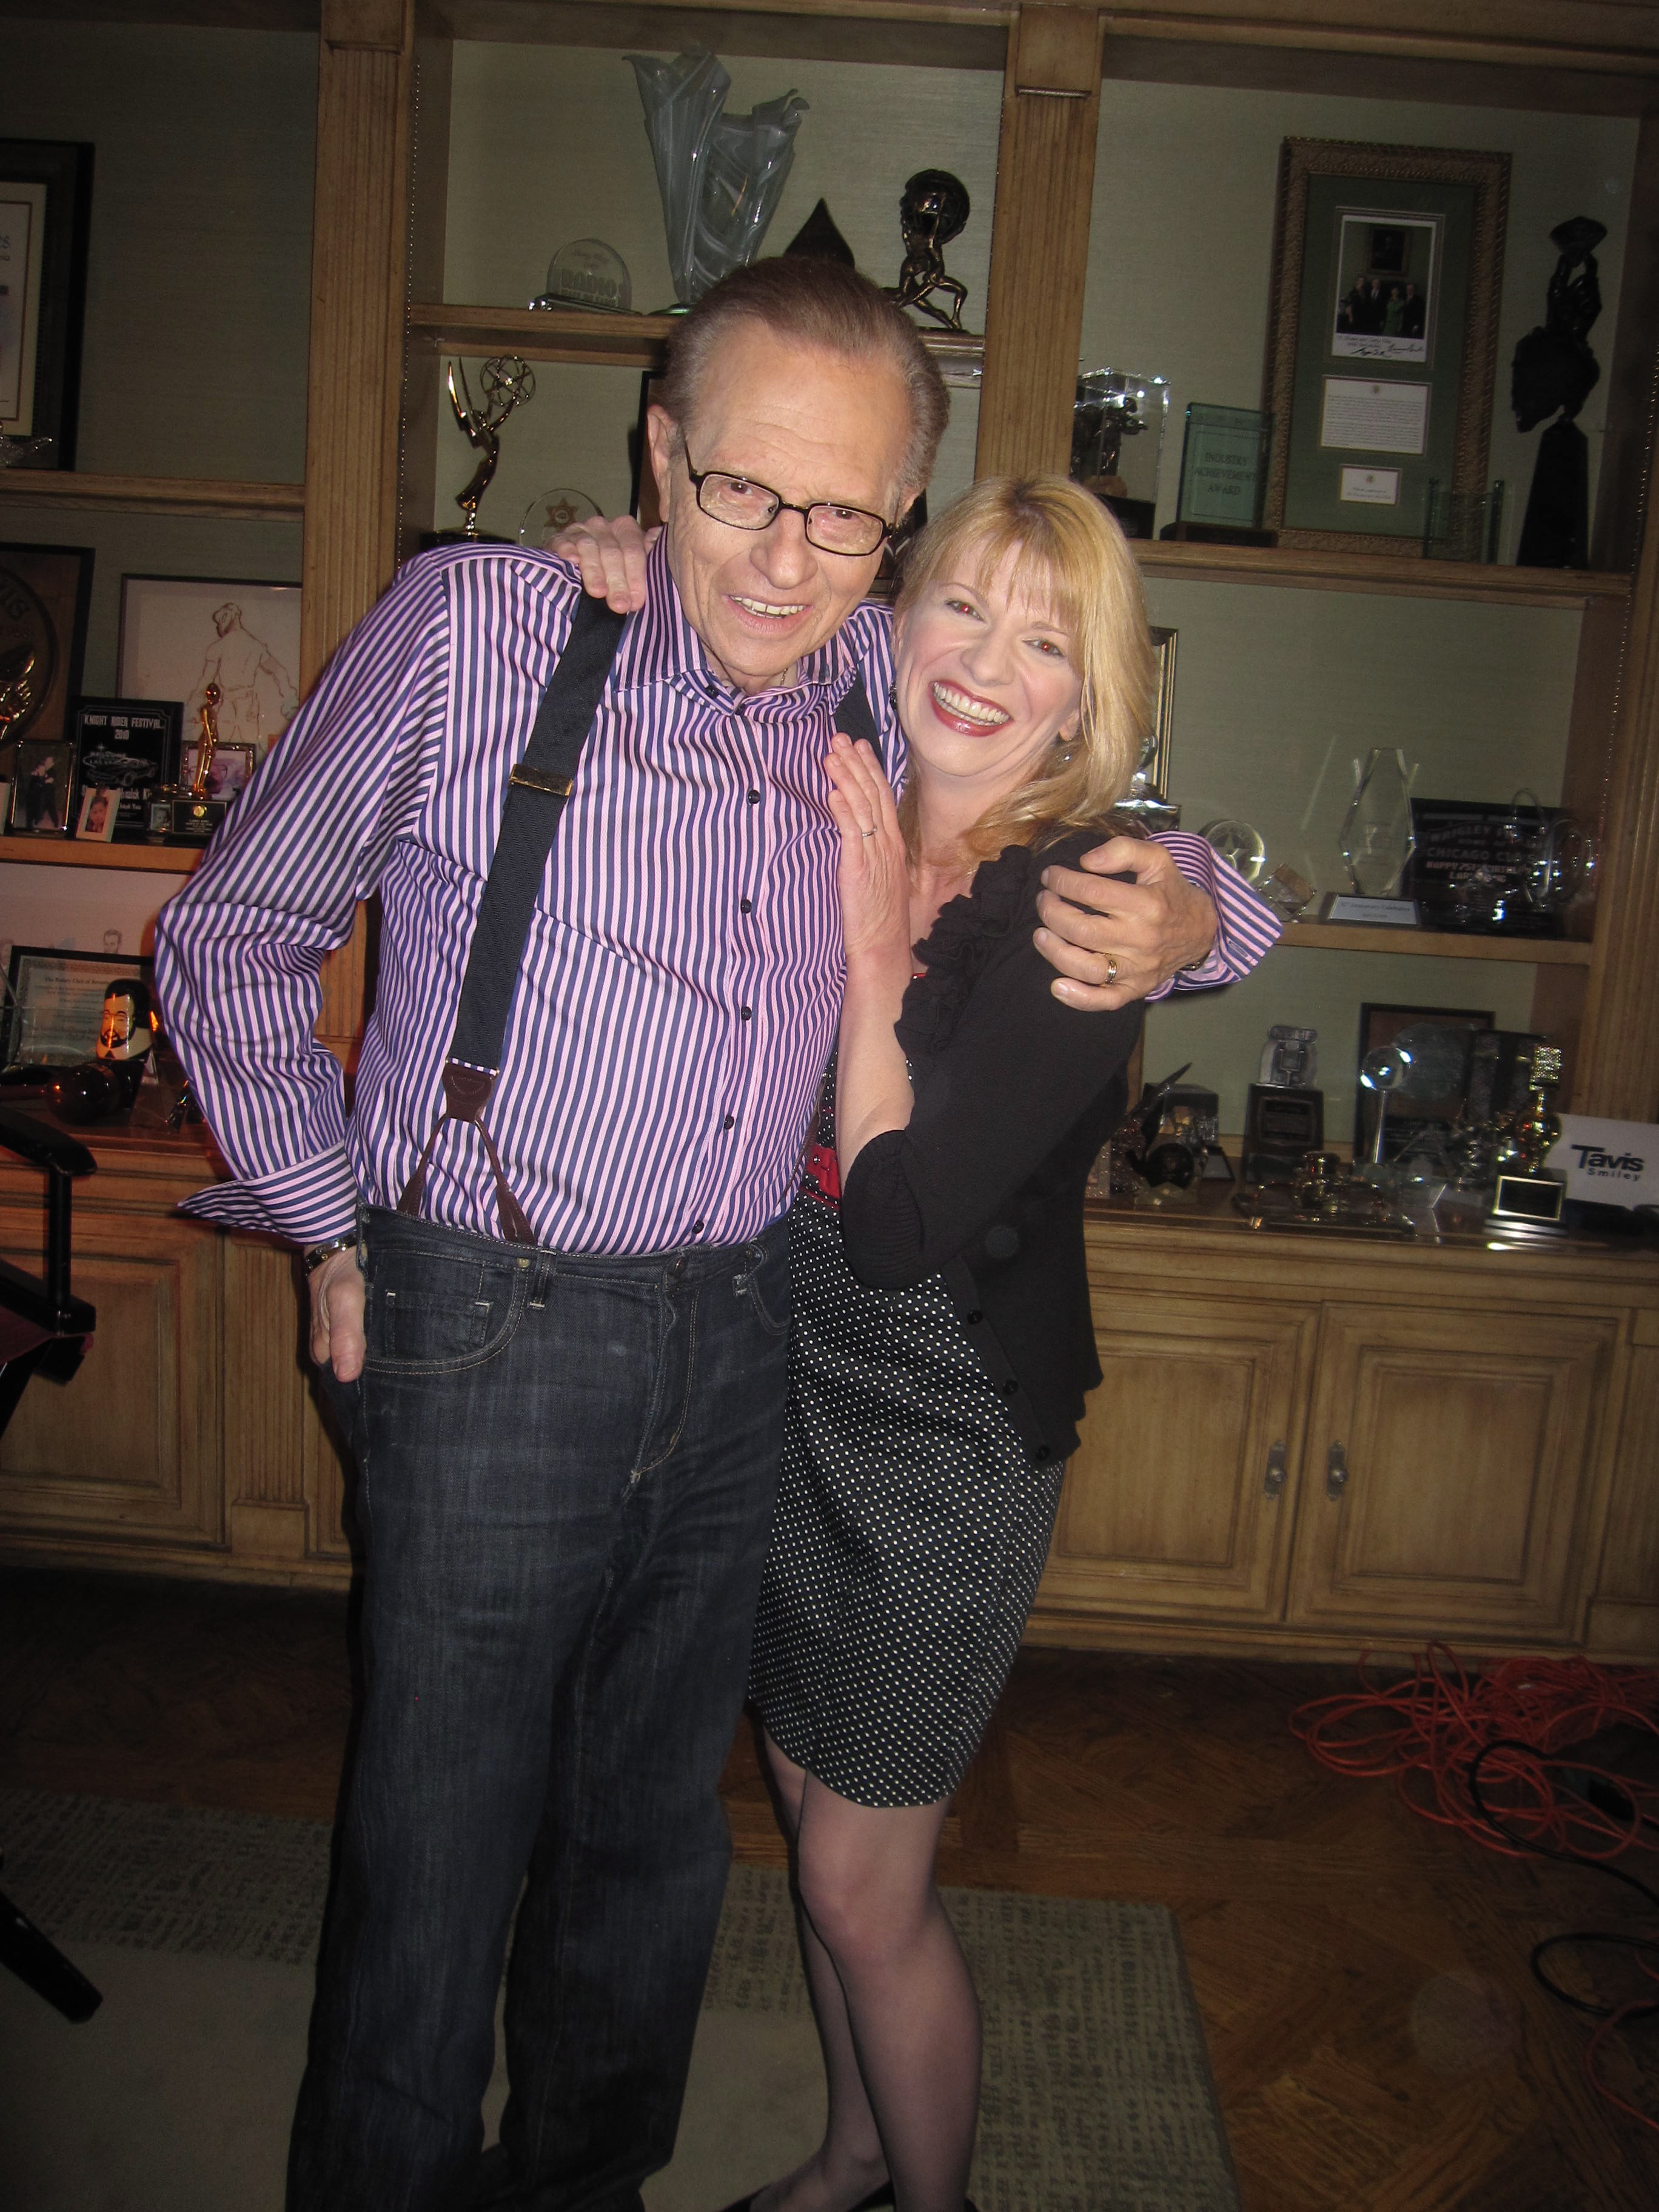 Larry King and Colette Joel Interview with Larry King 'Dead End Kids' -'Bowery Boys' Documentary